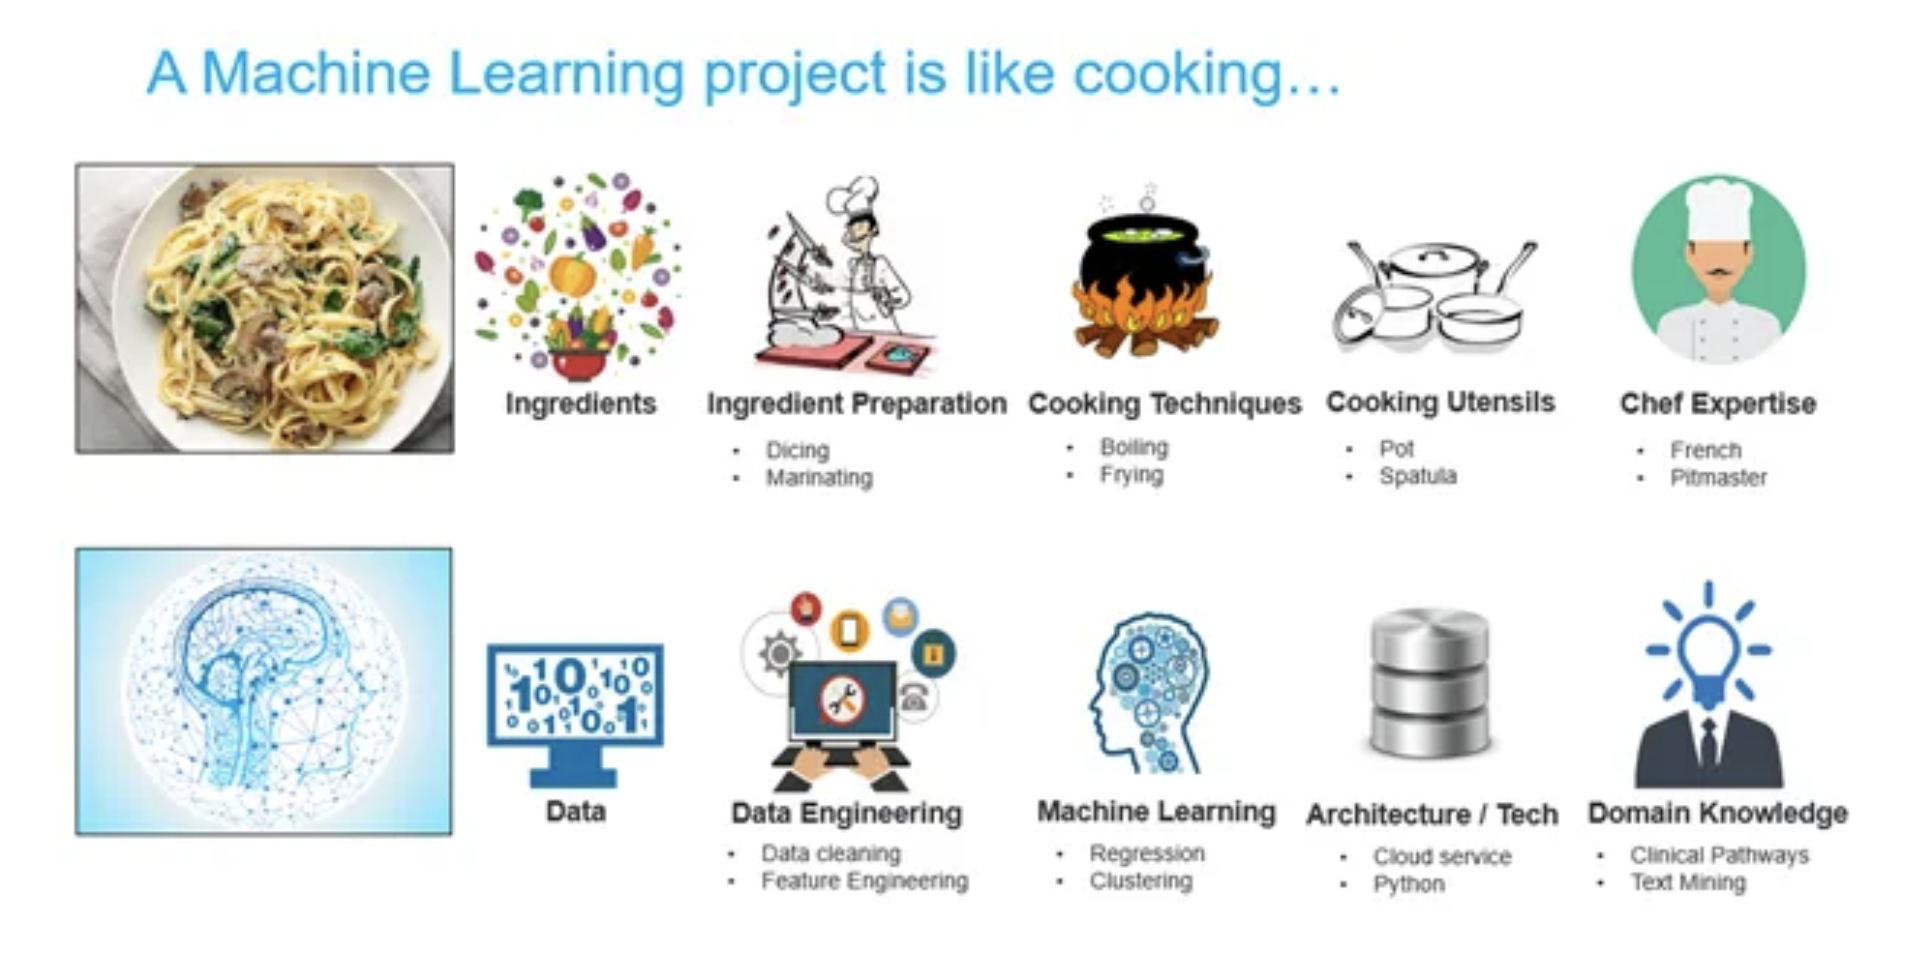 While_cooking_and_machine_learning_might_seem_like_completely_different_activities_they_share_many_similarities_in_terms_of_following_a_recipe.png